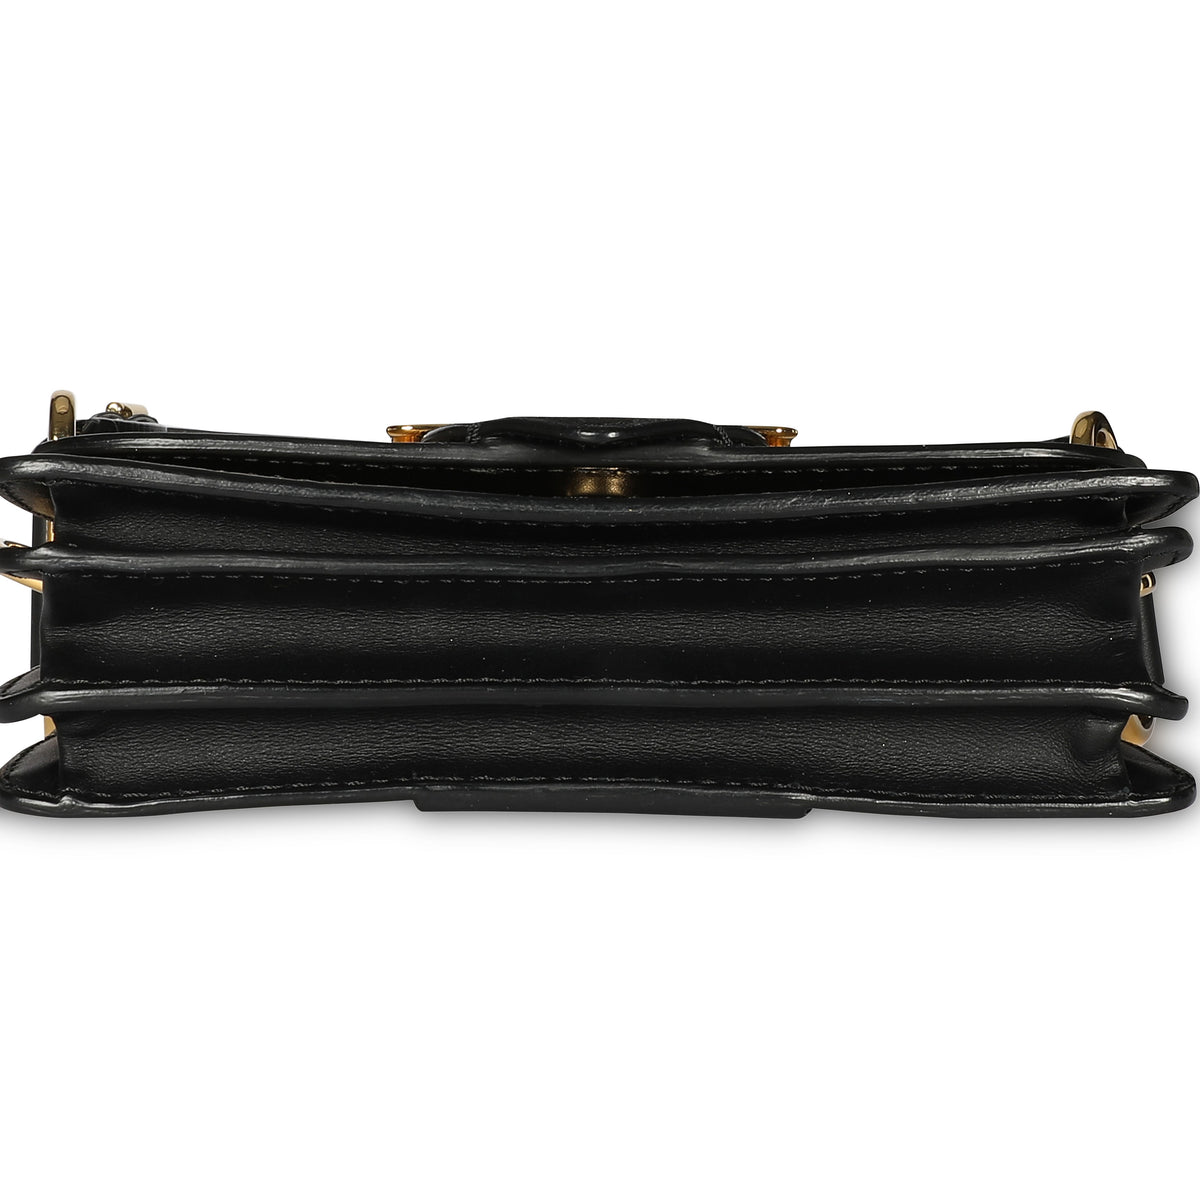 Burberry Gold Metallic Leather & Black Suede Madison Convertible Bag